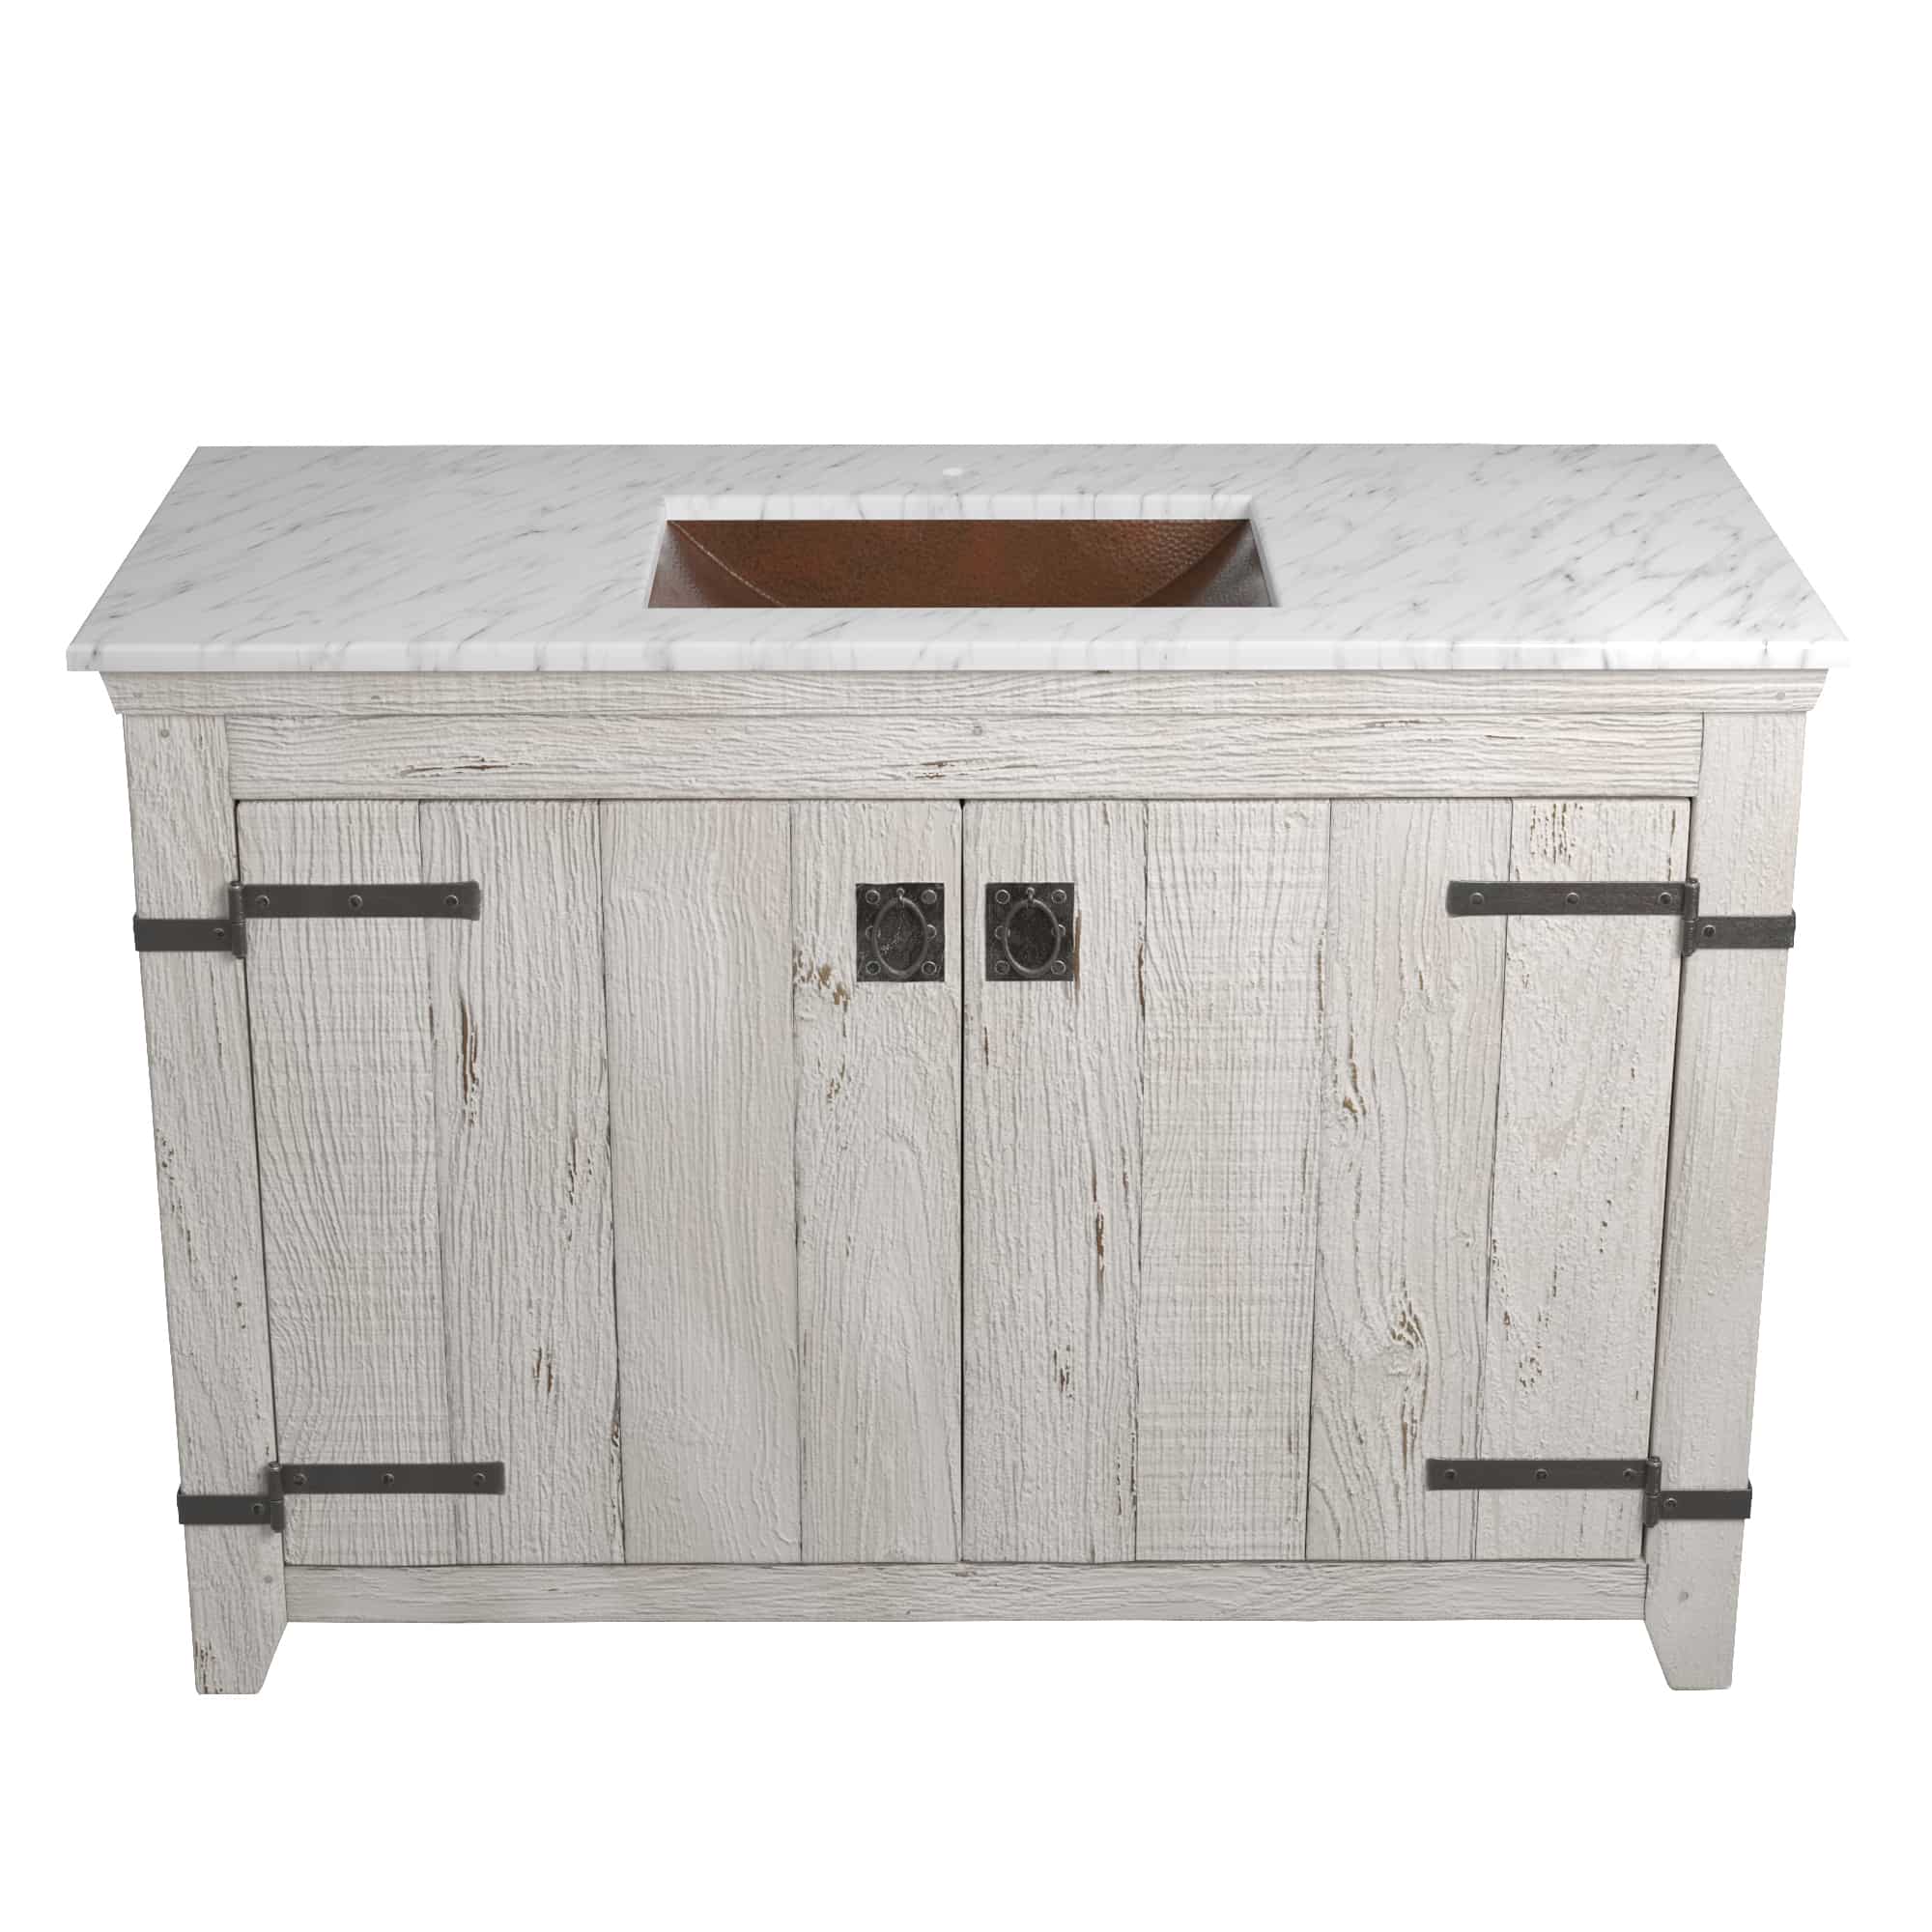 Native Trails 48" Americana Vanity in Whitewash with Carrara Marble Top and Avila in Antique, Single Faucet Hole, BND48-VB-CT-CP-001